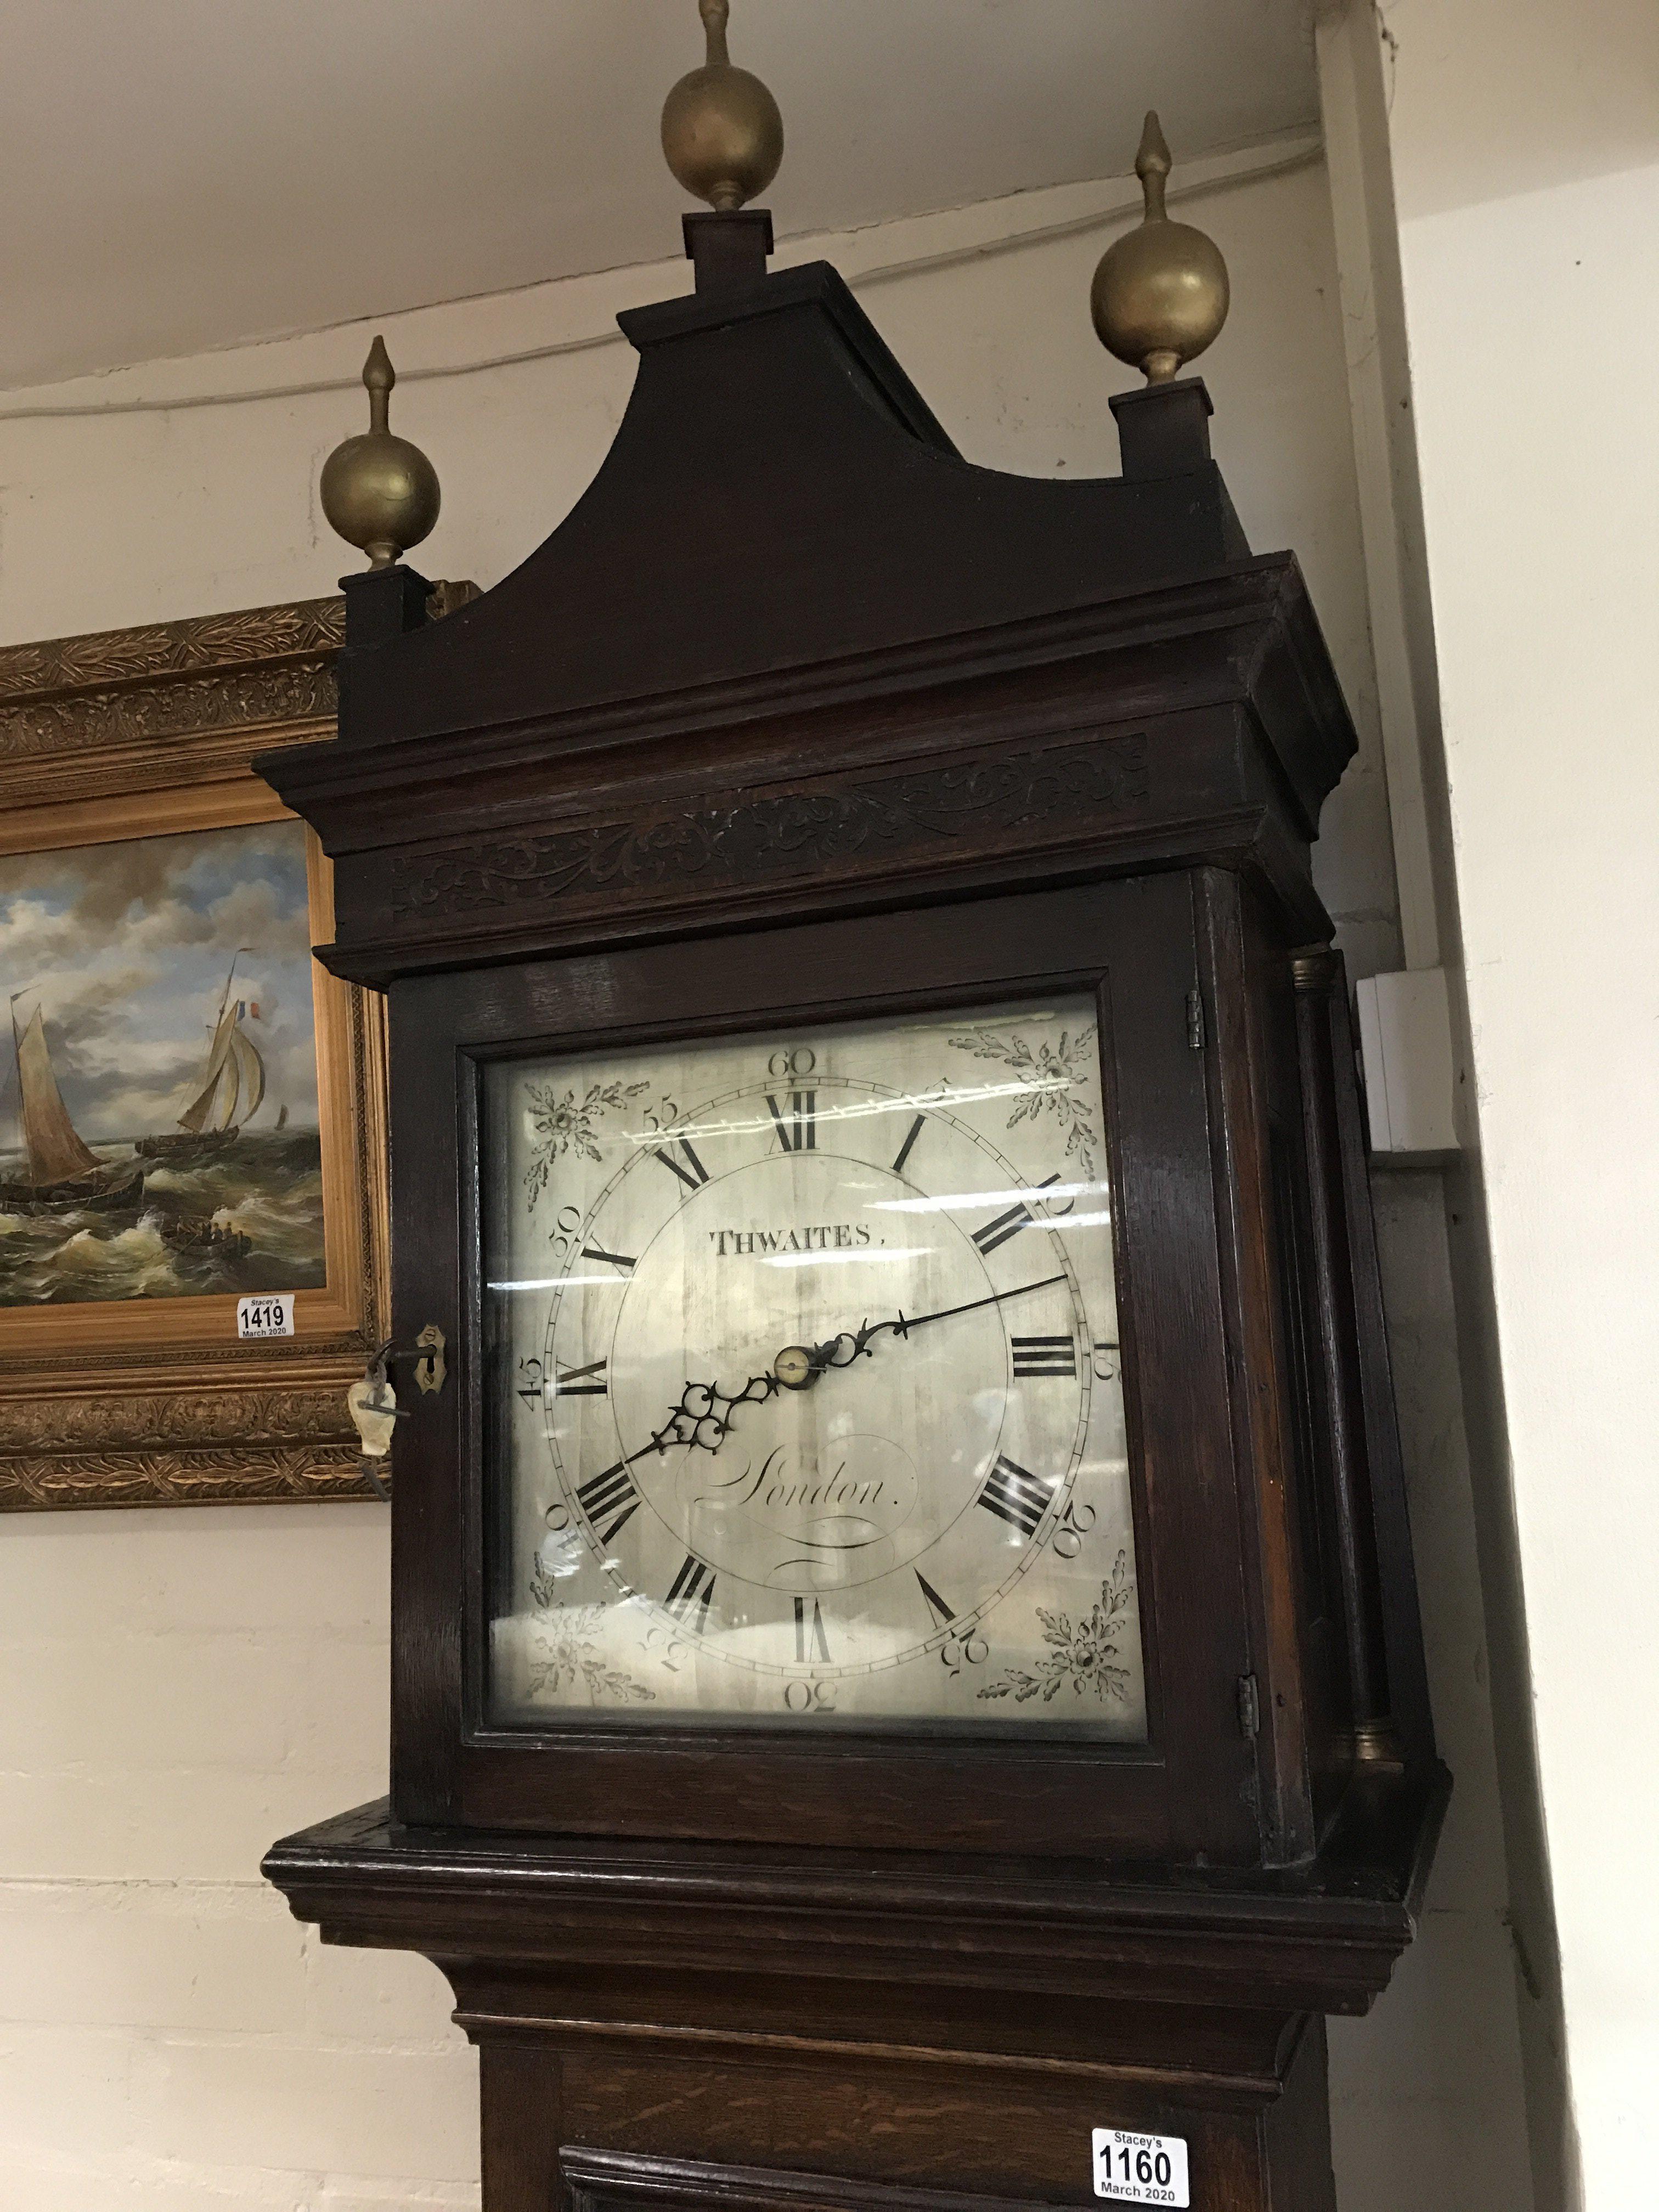 A 30 hour oak cased longcase clock with a silvered dial and movement by Thwaites, London c.1816.